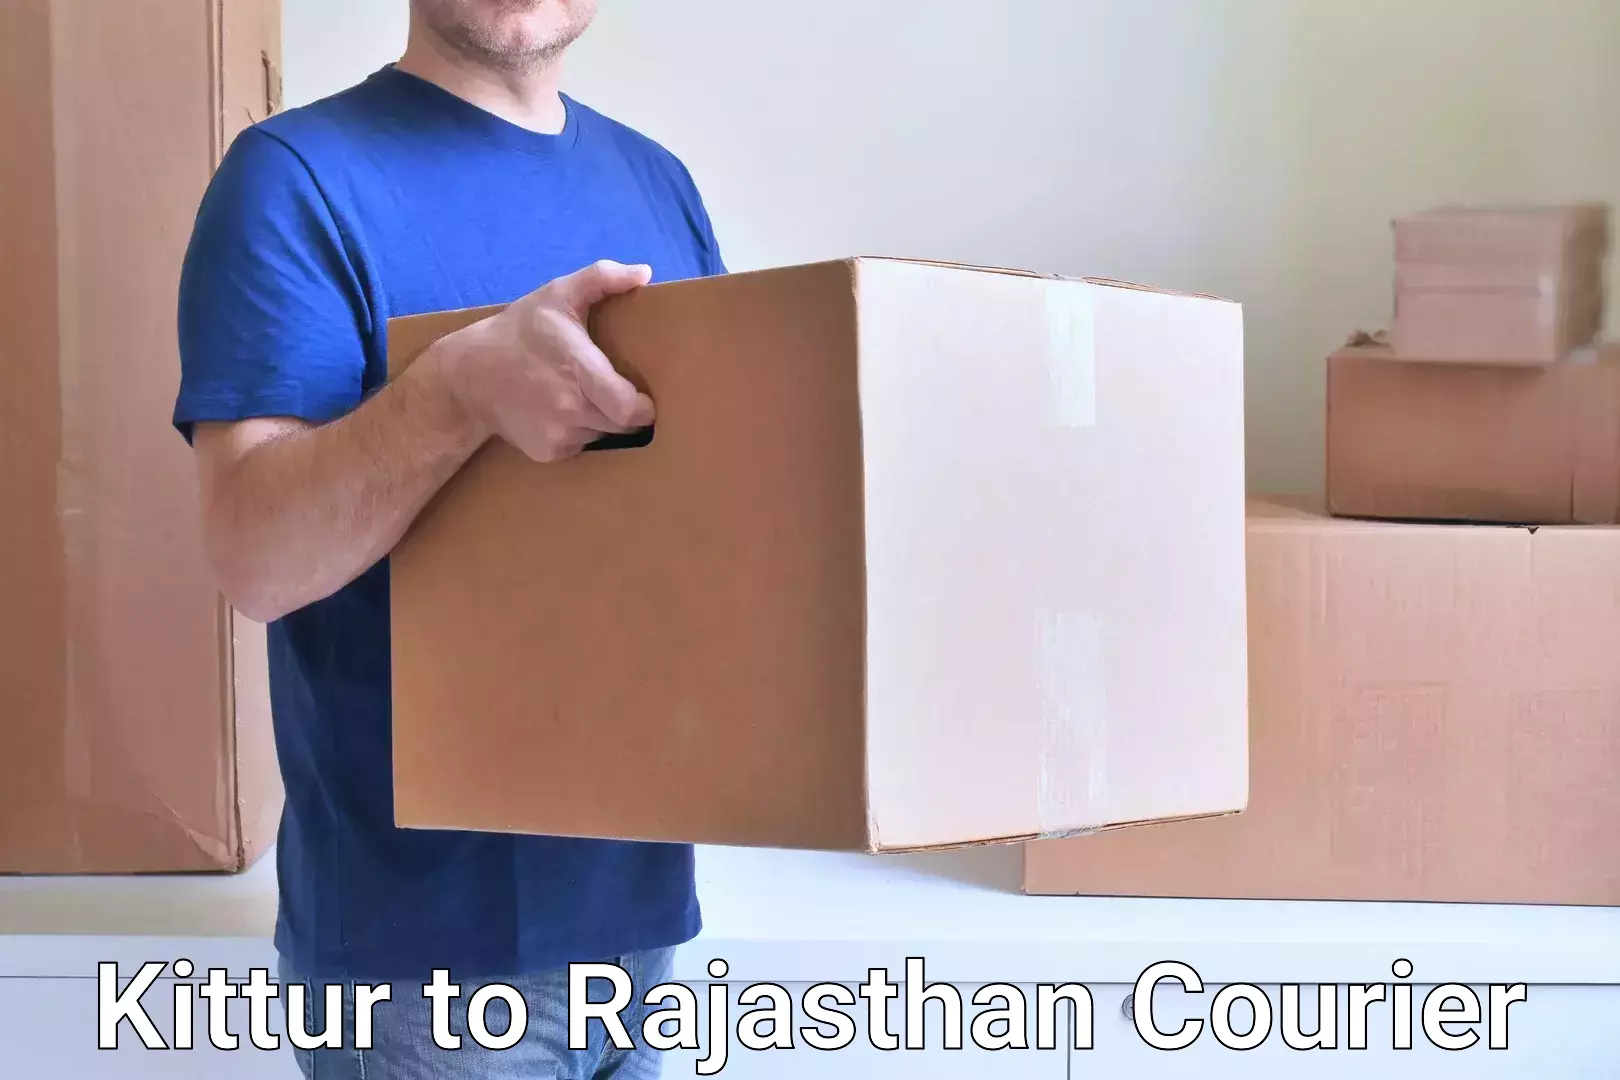 Quality courier services Kittur to Sultana